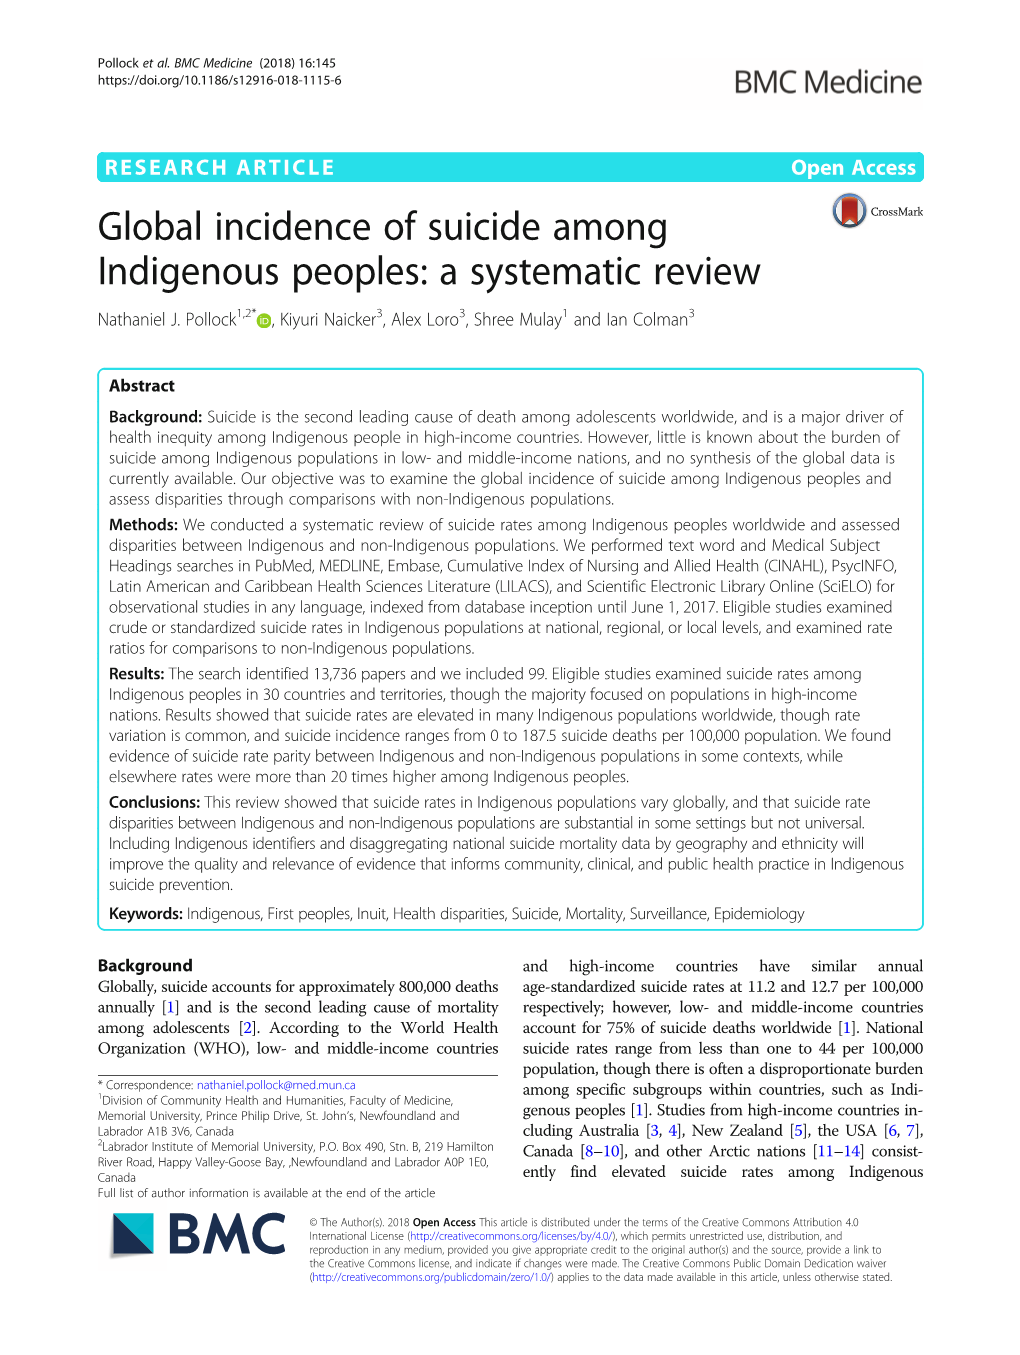 Global Incidence of Suicide Among Indigenous Peoples: a Systematic Review Nathaniel J